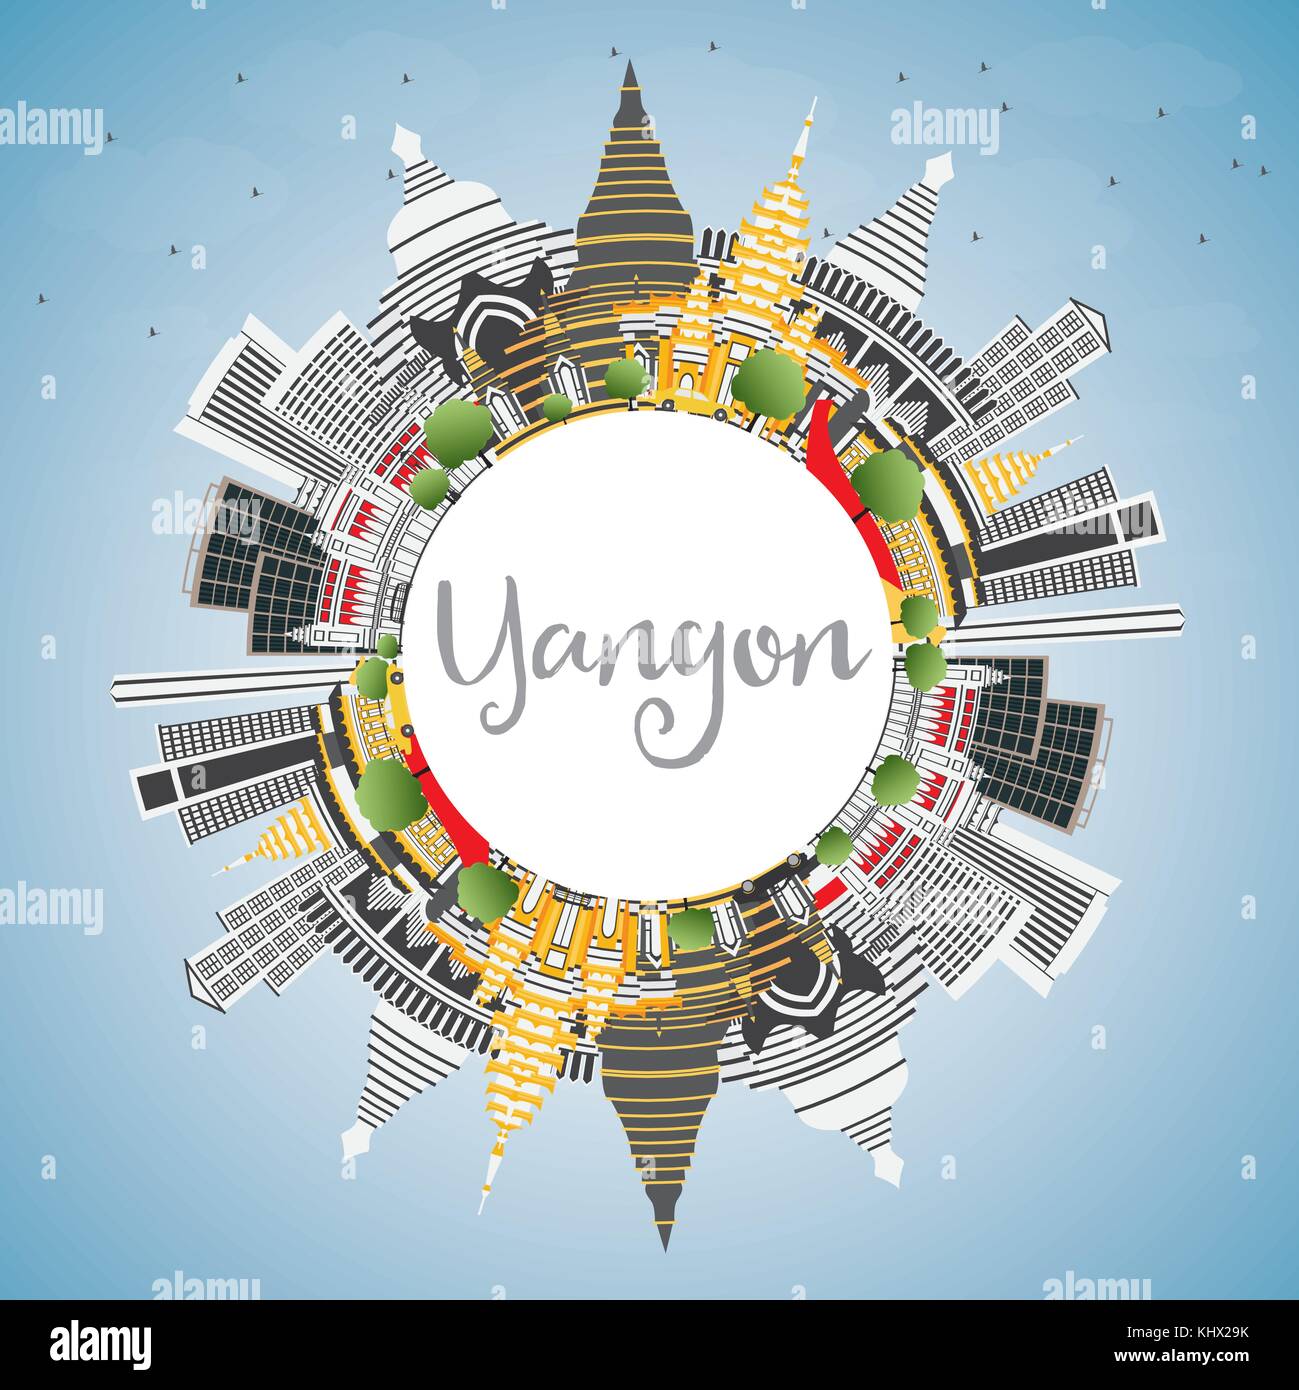 Yangon Skyline with Gray Buildings, Blue Sky and Copy Space. Vector Illustration. Business Travel and Tourism Concept with Historic Architecture. Stock Vector